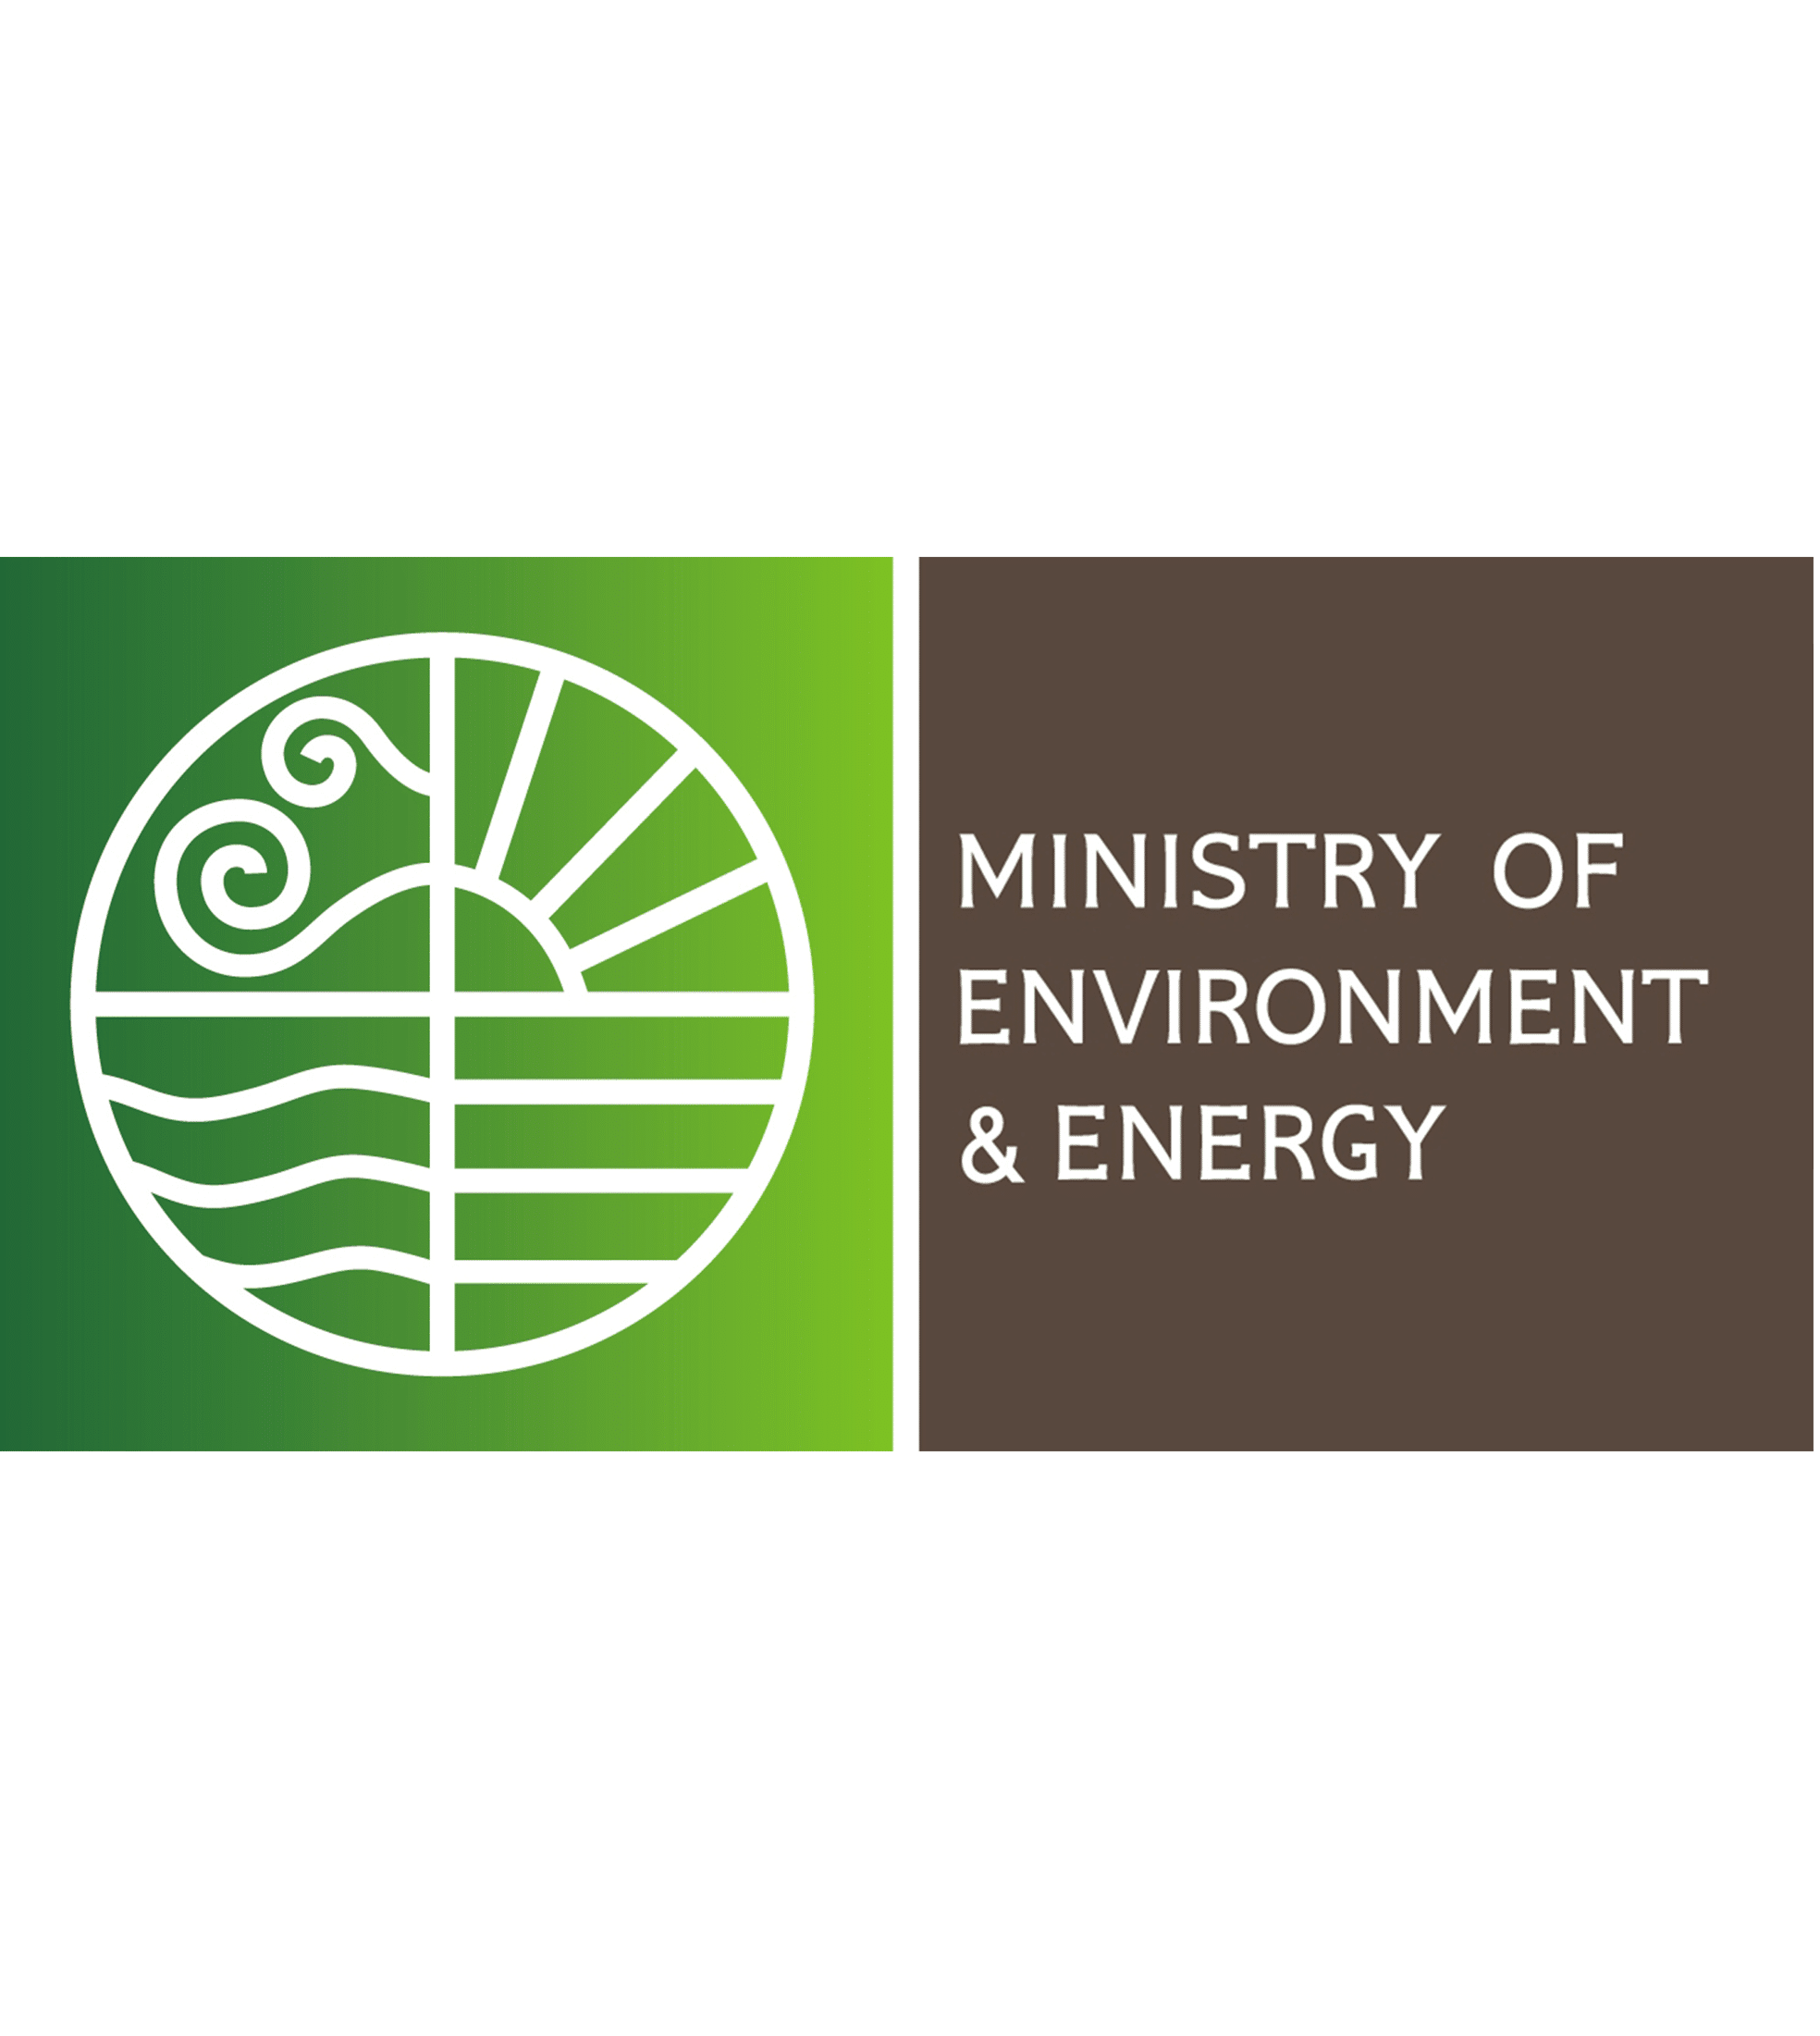 Ministry of Environment & Energy